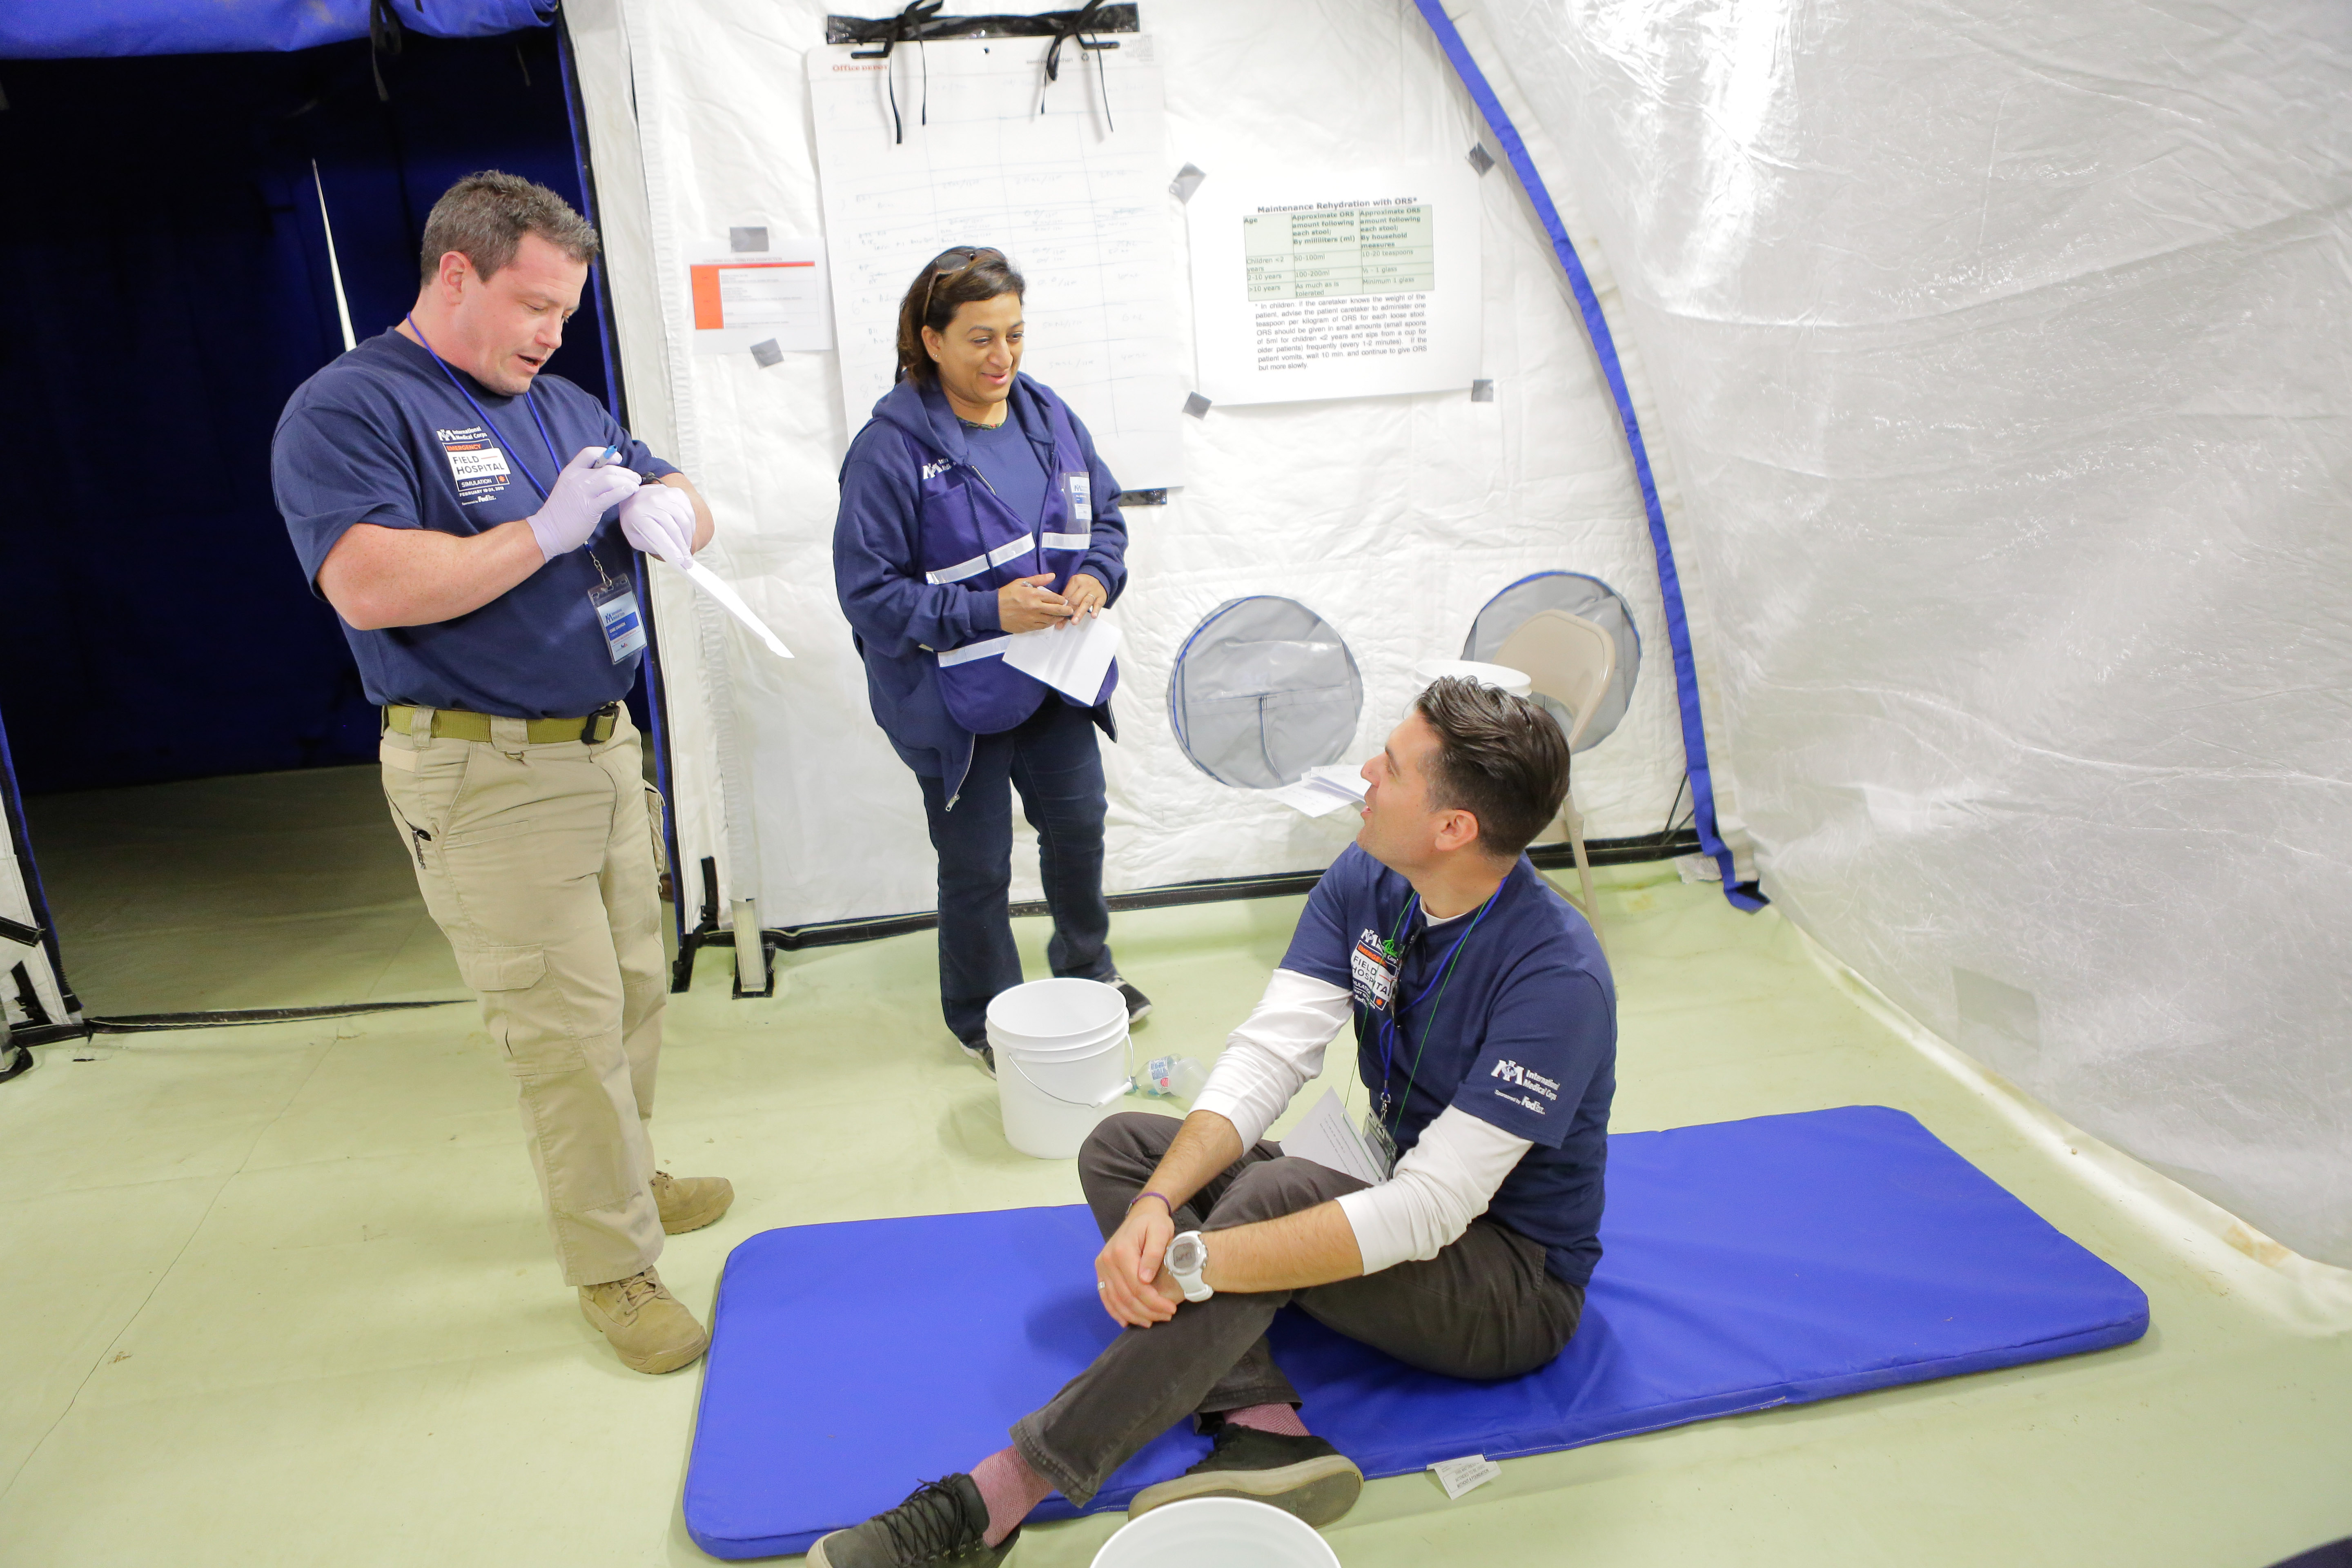 Simulation participants inside the field hospital